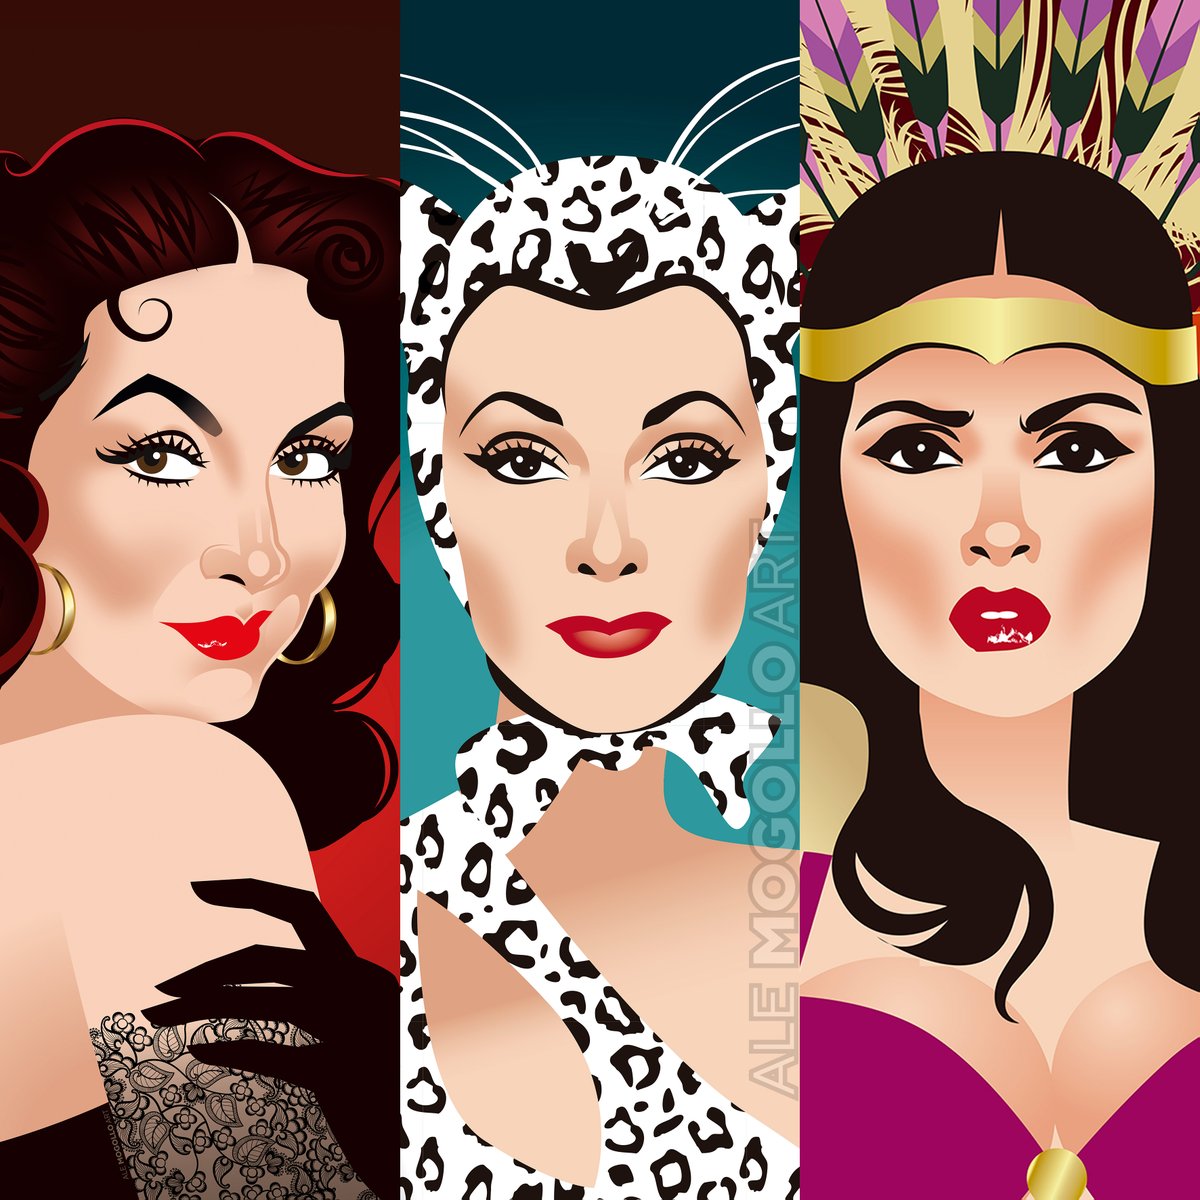 Happy 5 de Mayo to all my friends and followers who celebrate the Mexican culture and heritage, with these three wonderful stars that dazzled the silver screen.
#cincodemayo #mexico #mexicanculture #mexicanheritage #mariafelix #doloresdelrio #salmahayek #TCMParty